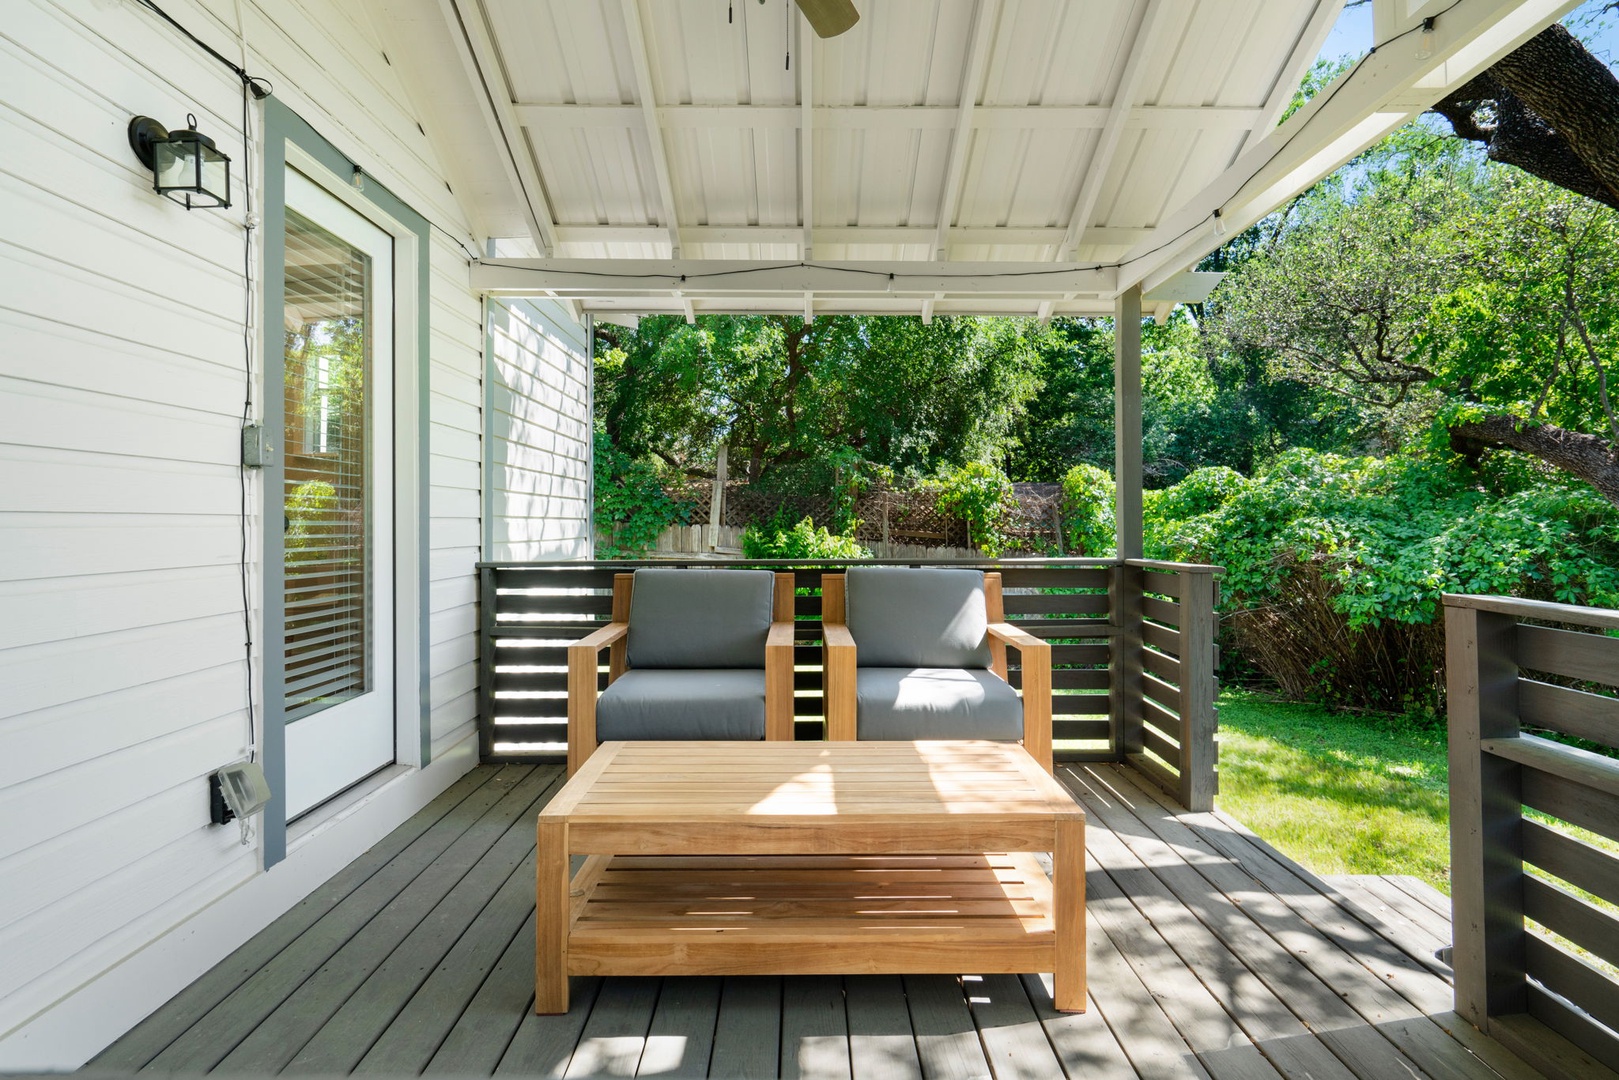 Unwind in the fresh air on the shaded patio